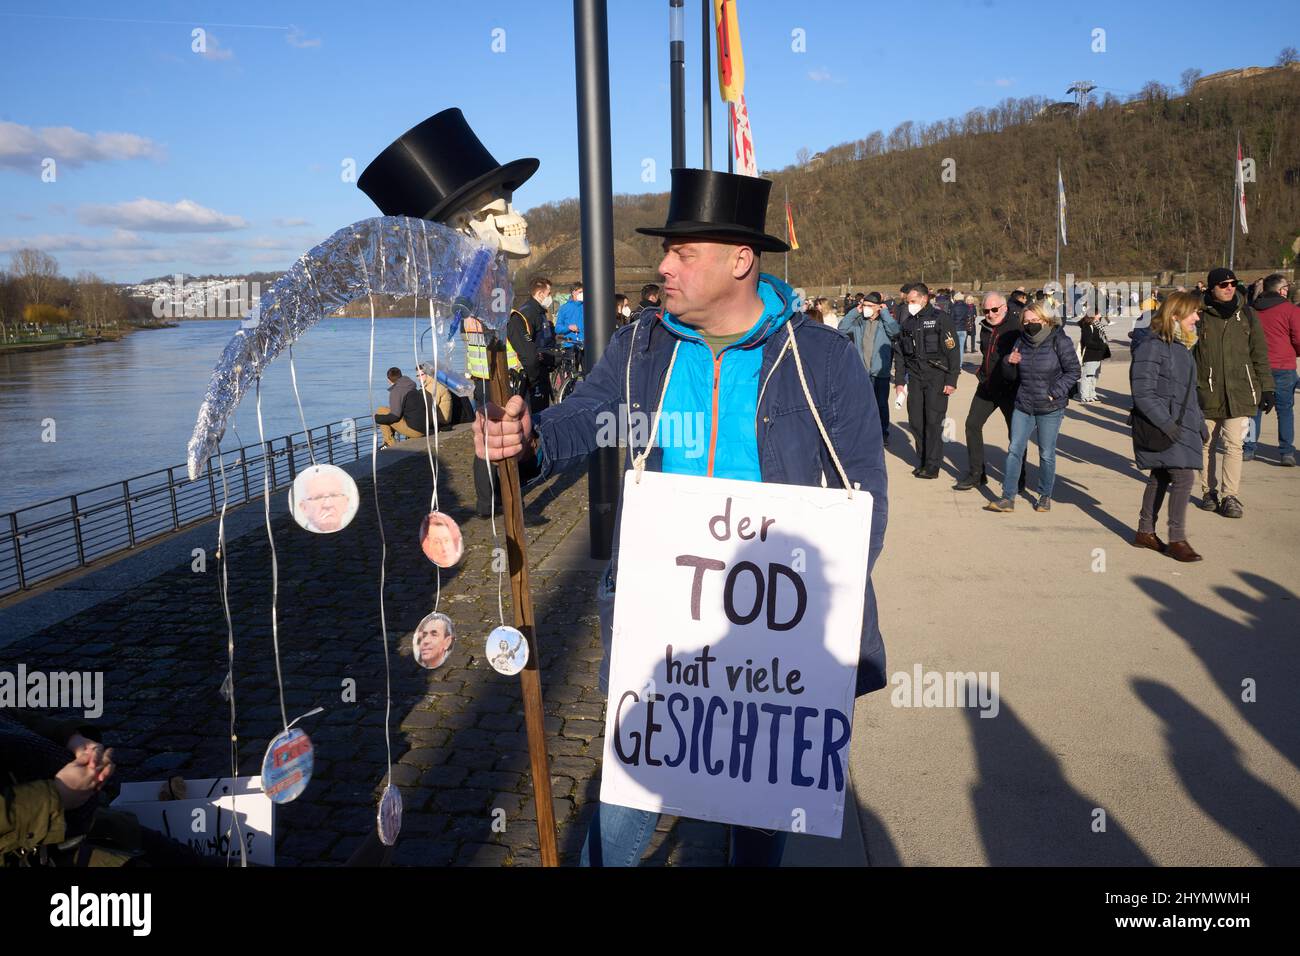 A man demonstrates against the government's Corona measures. Koblenz, Rhineland-Palatinate, Germany Stock Photo